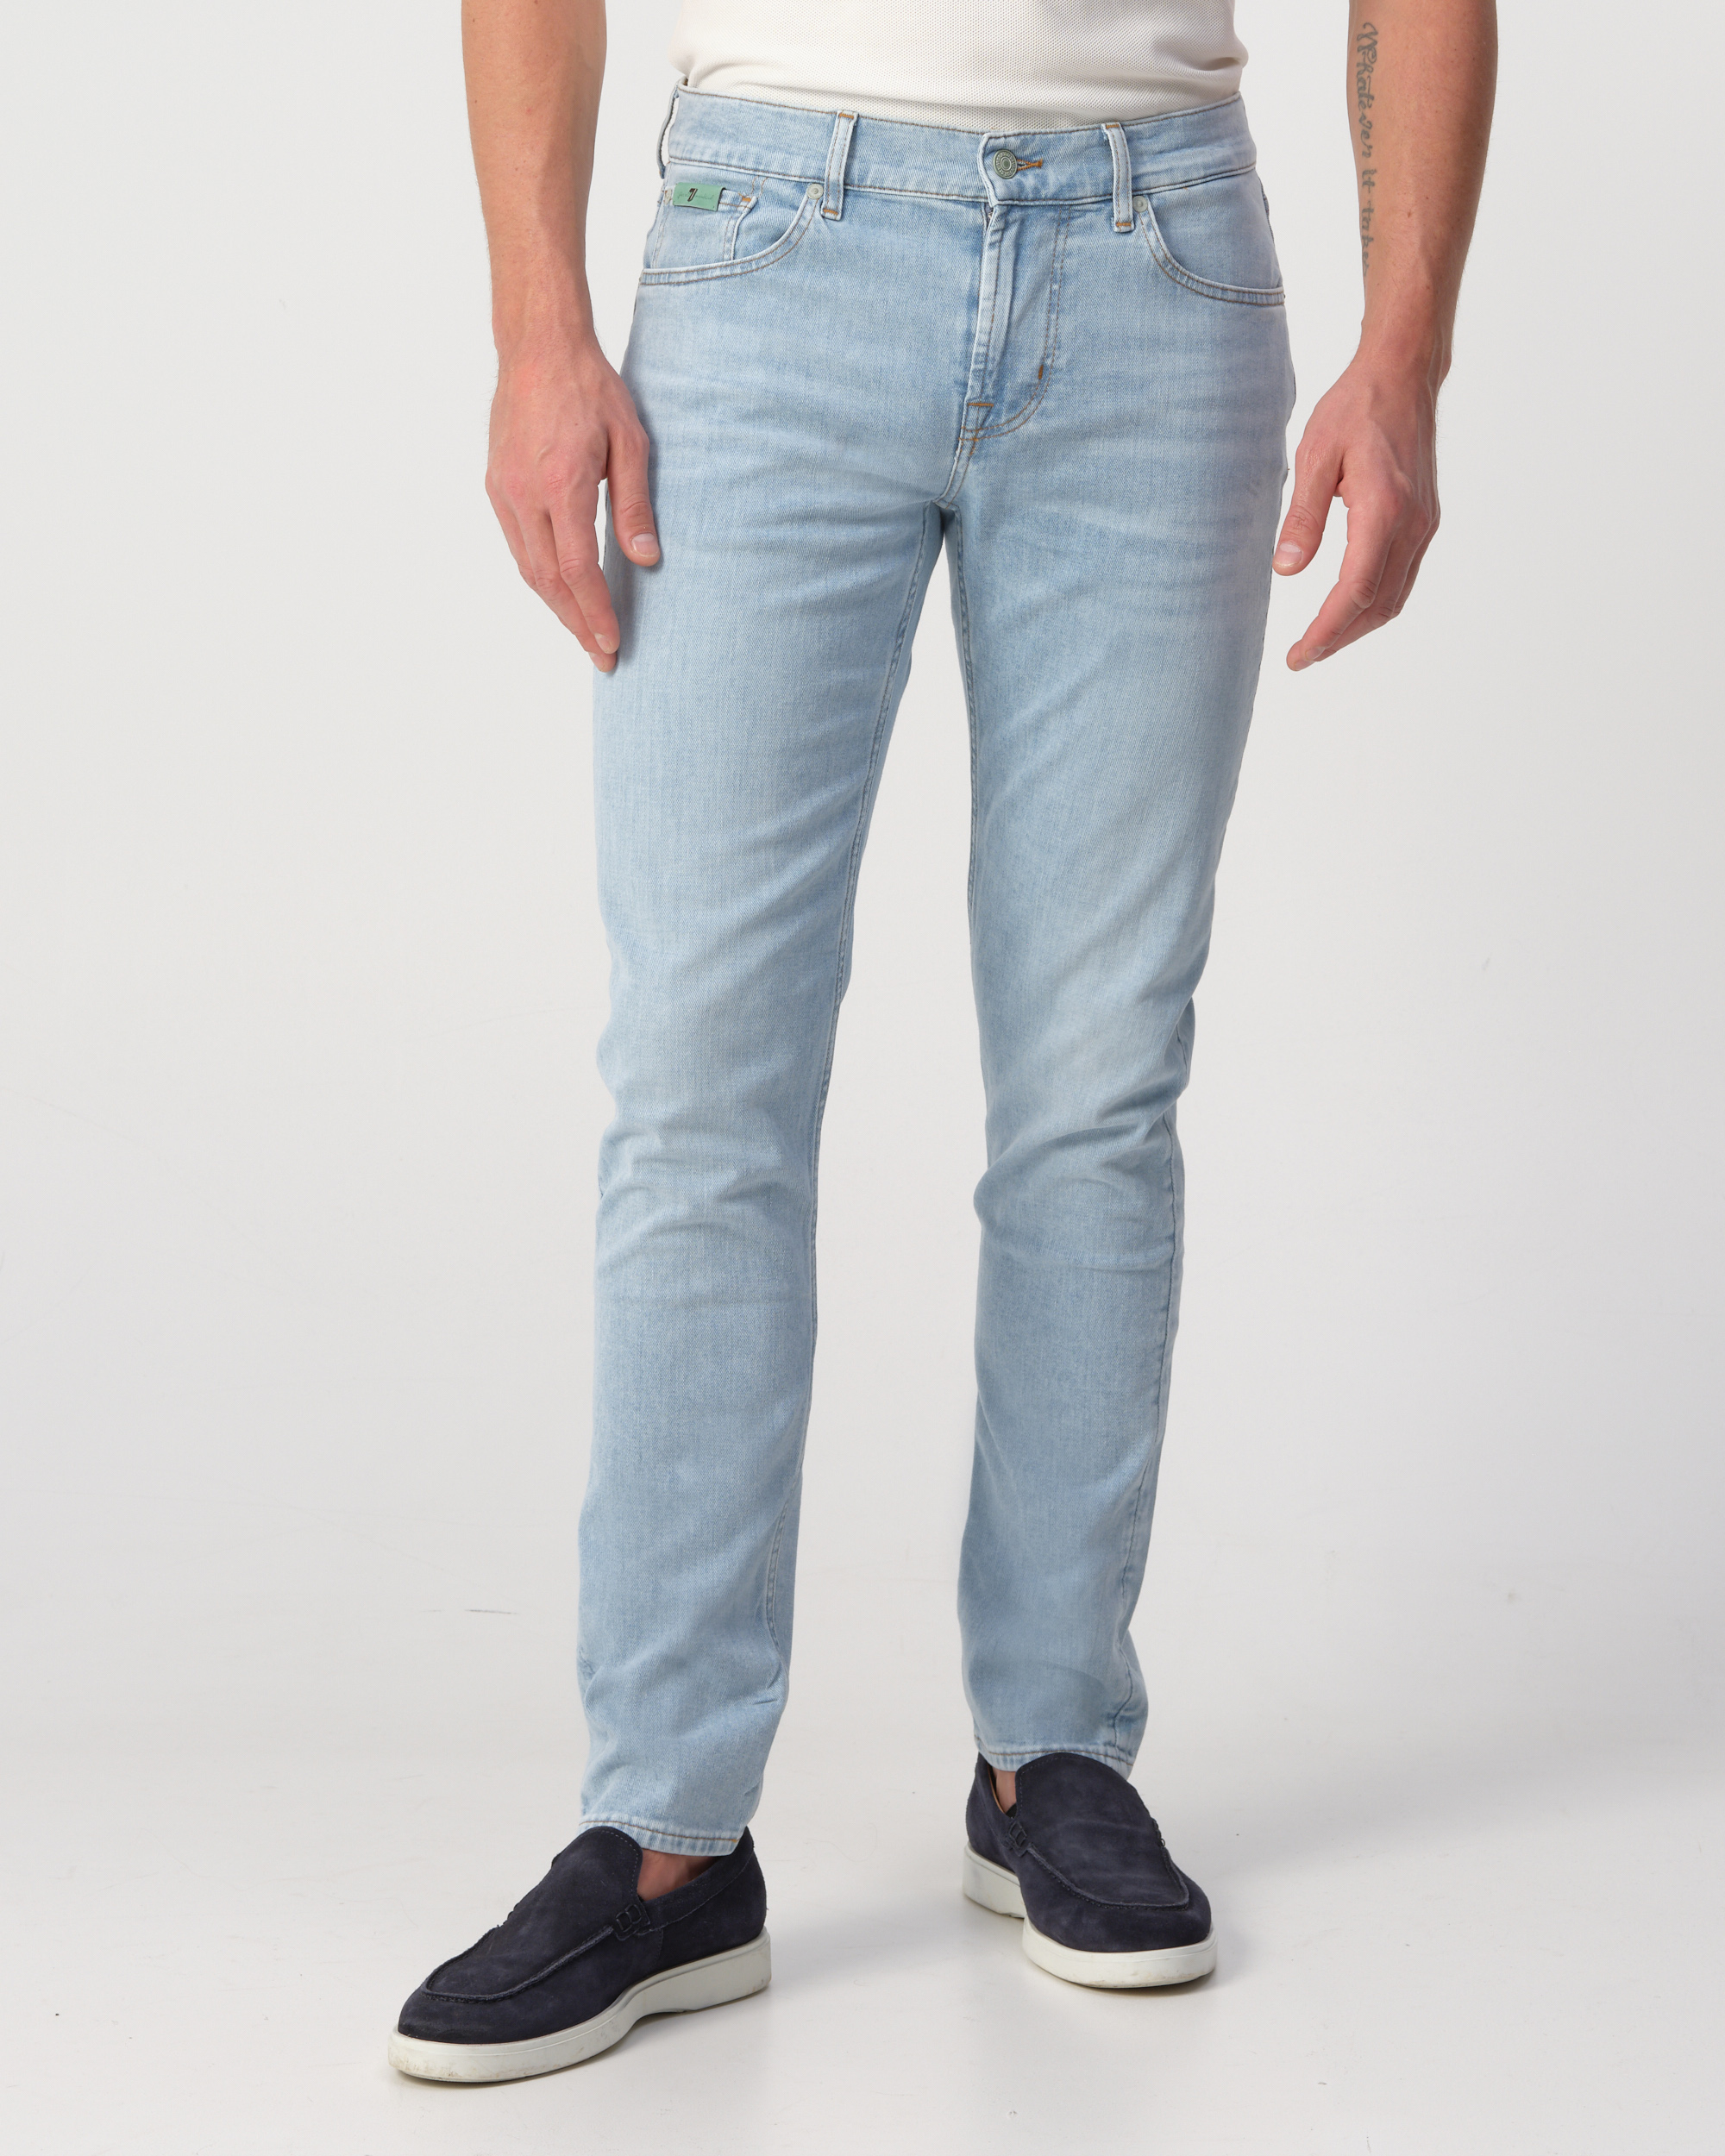 Afbeelding van 7 For All Mankind Slimmy tapered special jeans